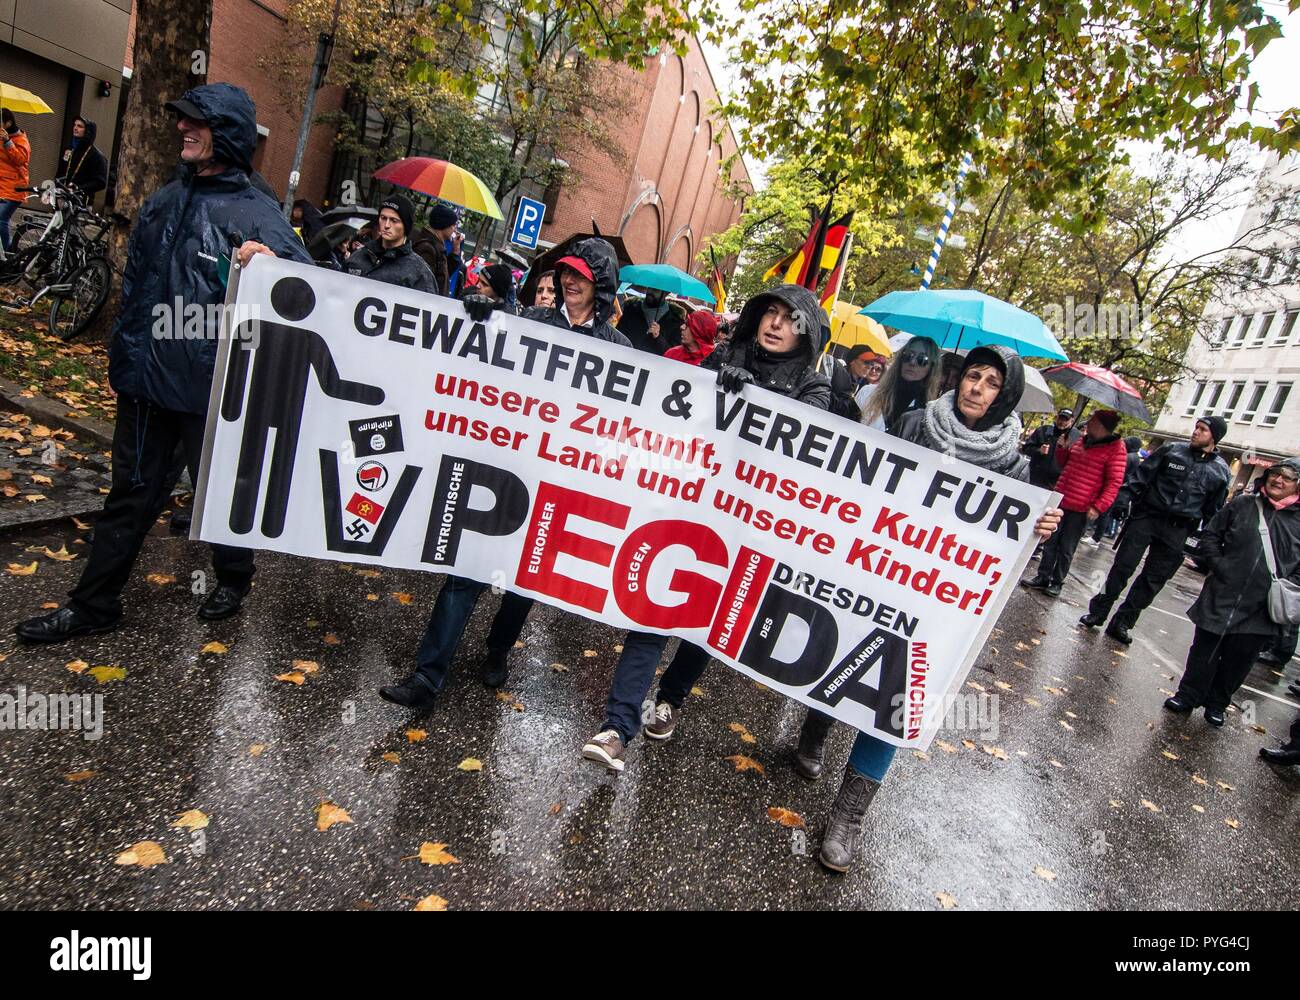 Munich, Bavaria, Germany. 27th Oct, 2018. Pegida marchers in Munich hold a banner. Attempting to draw more followers and expand PEGIDA into Bavaria, "Pegida Dresden"" announced an appearance by founders LUTZ BACHMANN and SIEGFRIED DAEBRITZ in Munich's Neuhausen district. Ultimately, the two did not arrive, leaving approximately 40 Pegida followers to march against over 450 counter-demonstrators. Pegida Dresden in Munich is actually Pegida Nuremburg who is attempting to expand south to Munich where the rival Pegida Muenchen is already active. The latter group is more closely associa Stock Photo